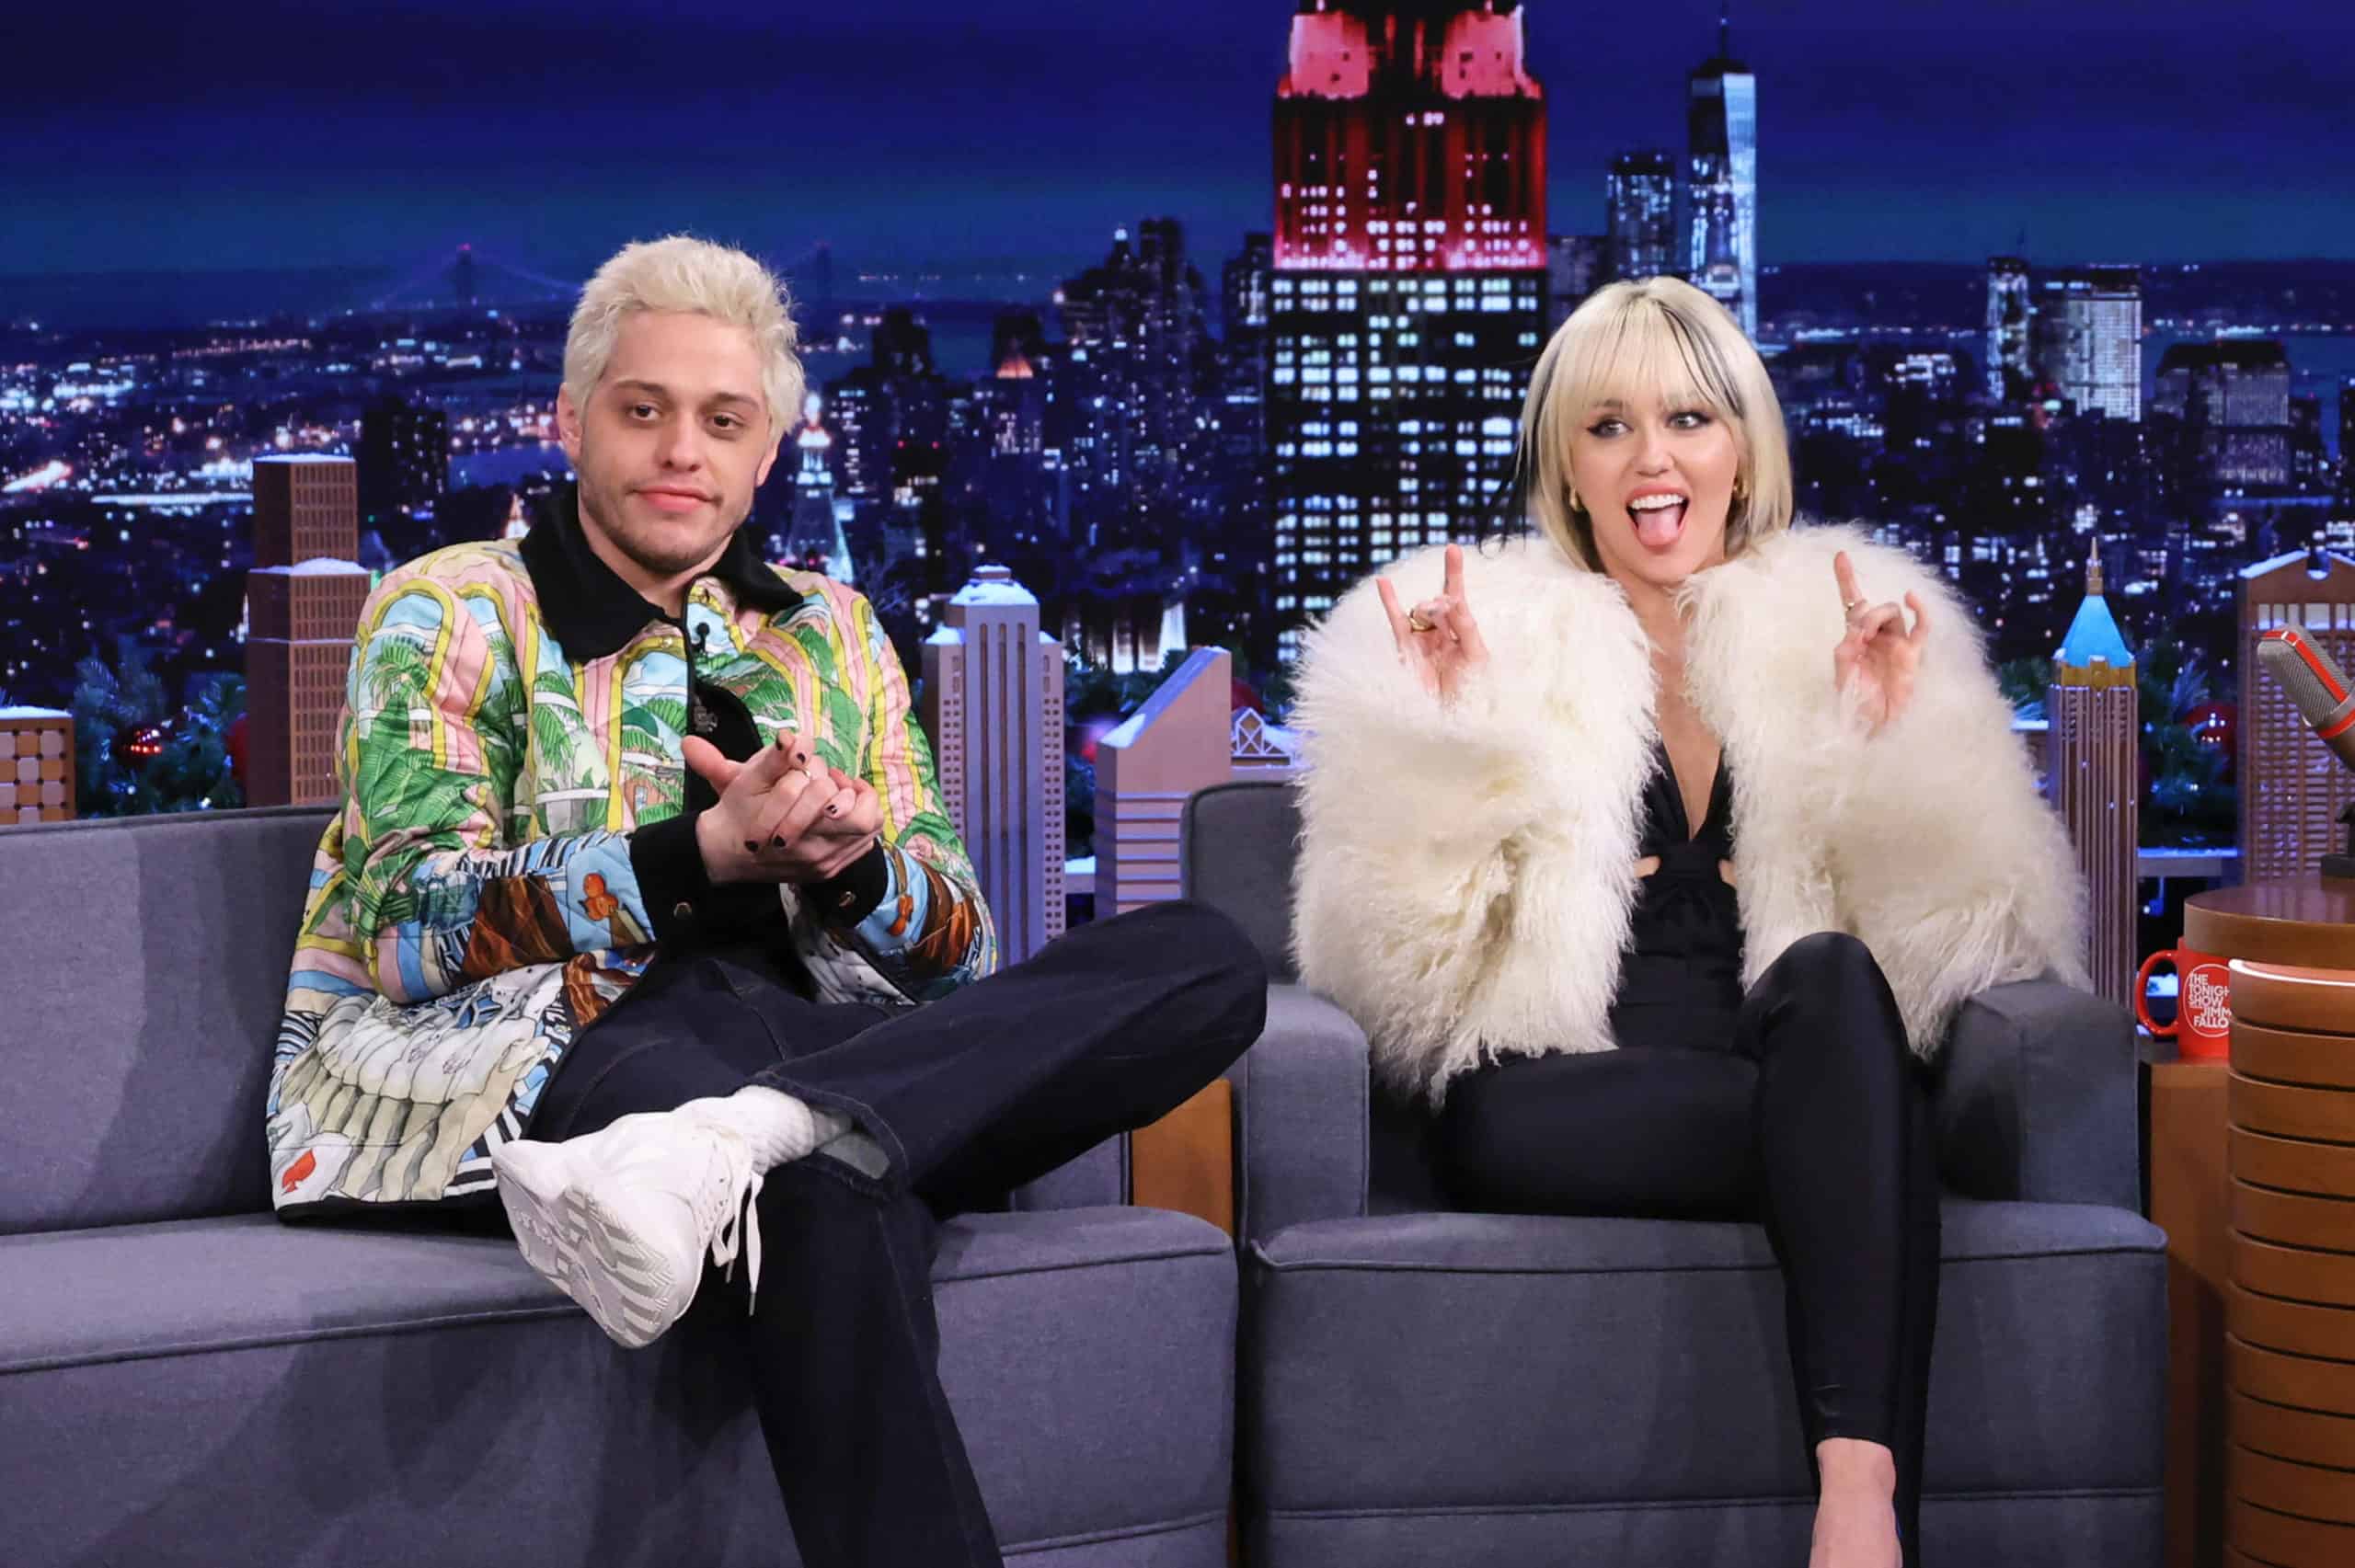 Miley Cyrus Reportedly Spotted Arriving At Pete Davidson’s Staten Island Condo After Jimmy Fallon Taping